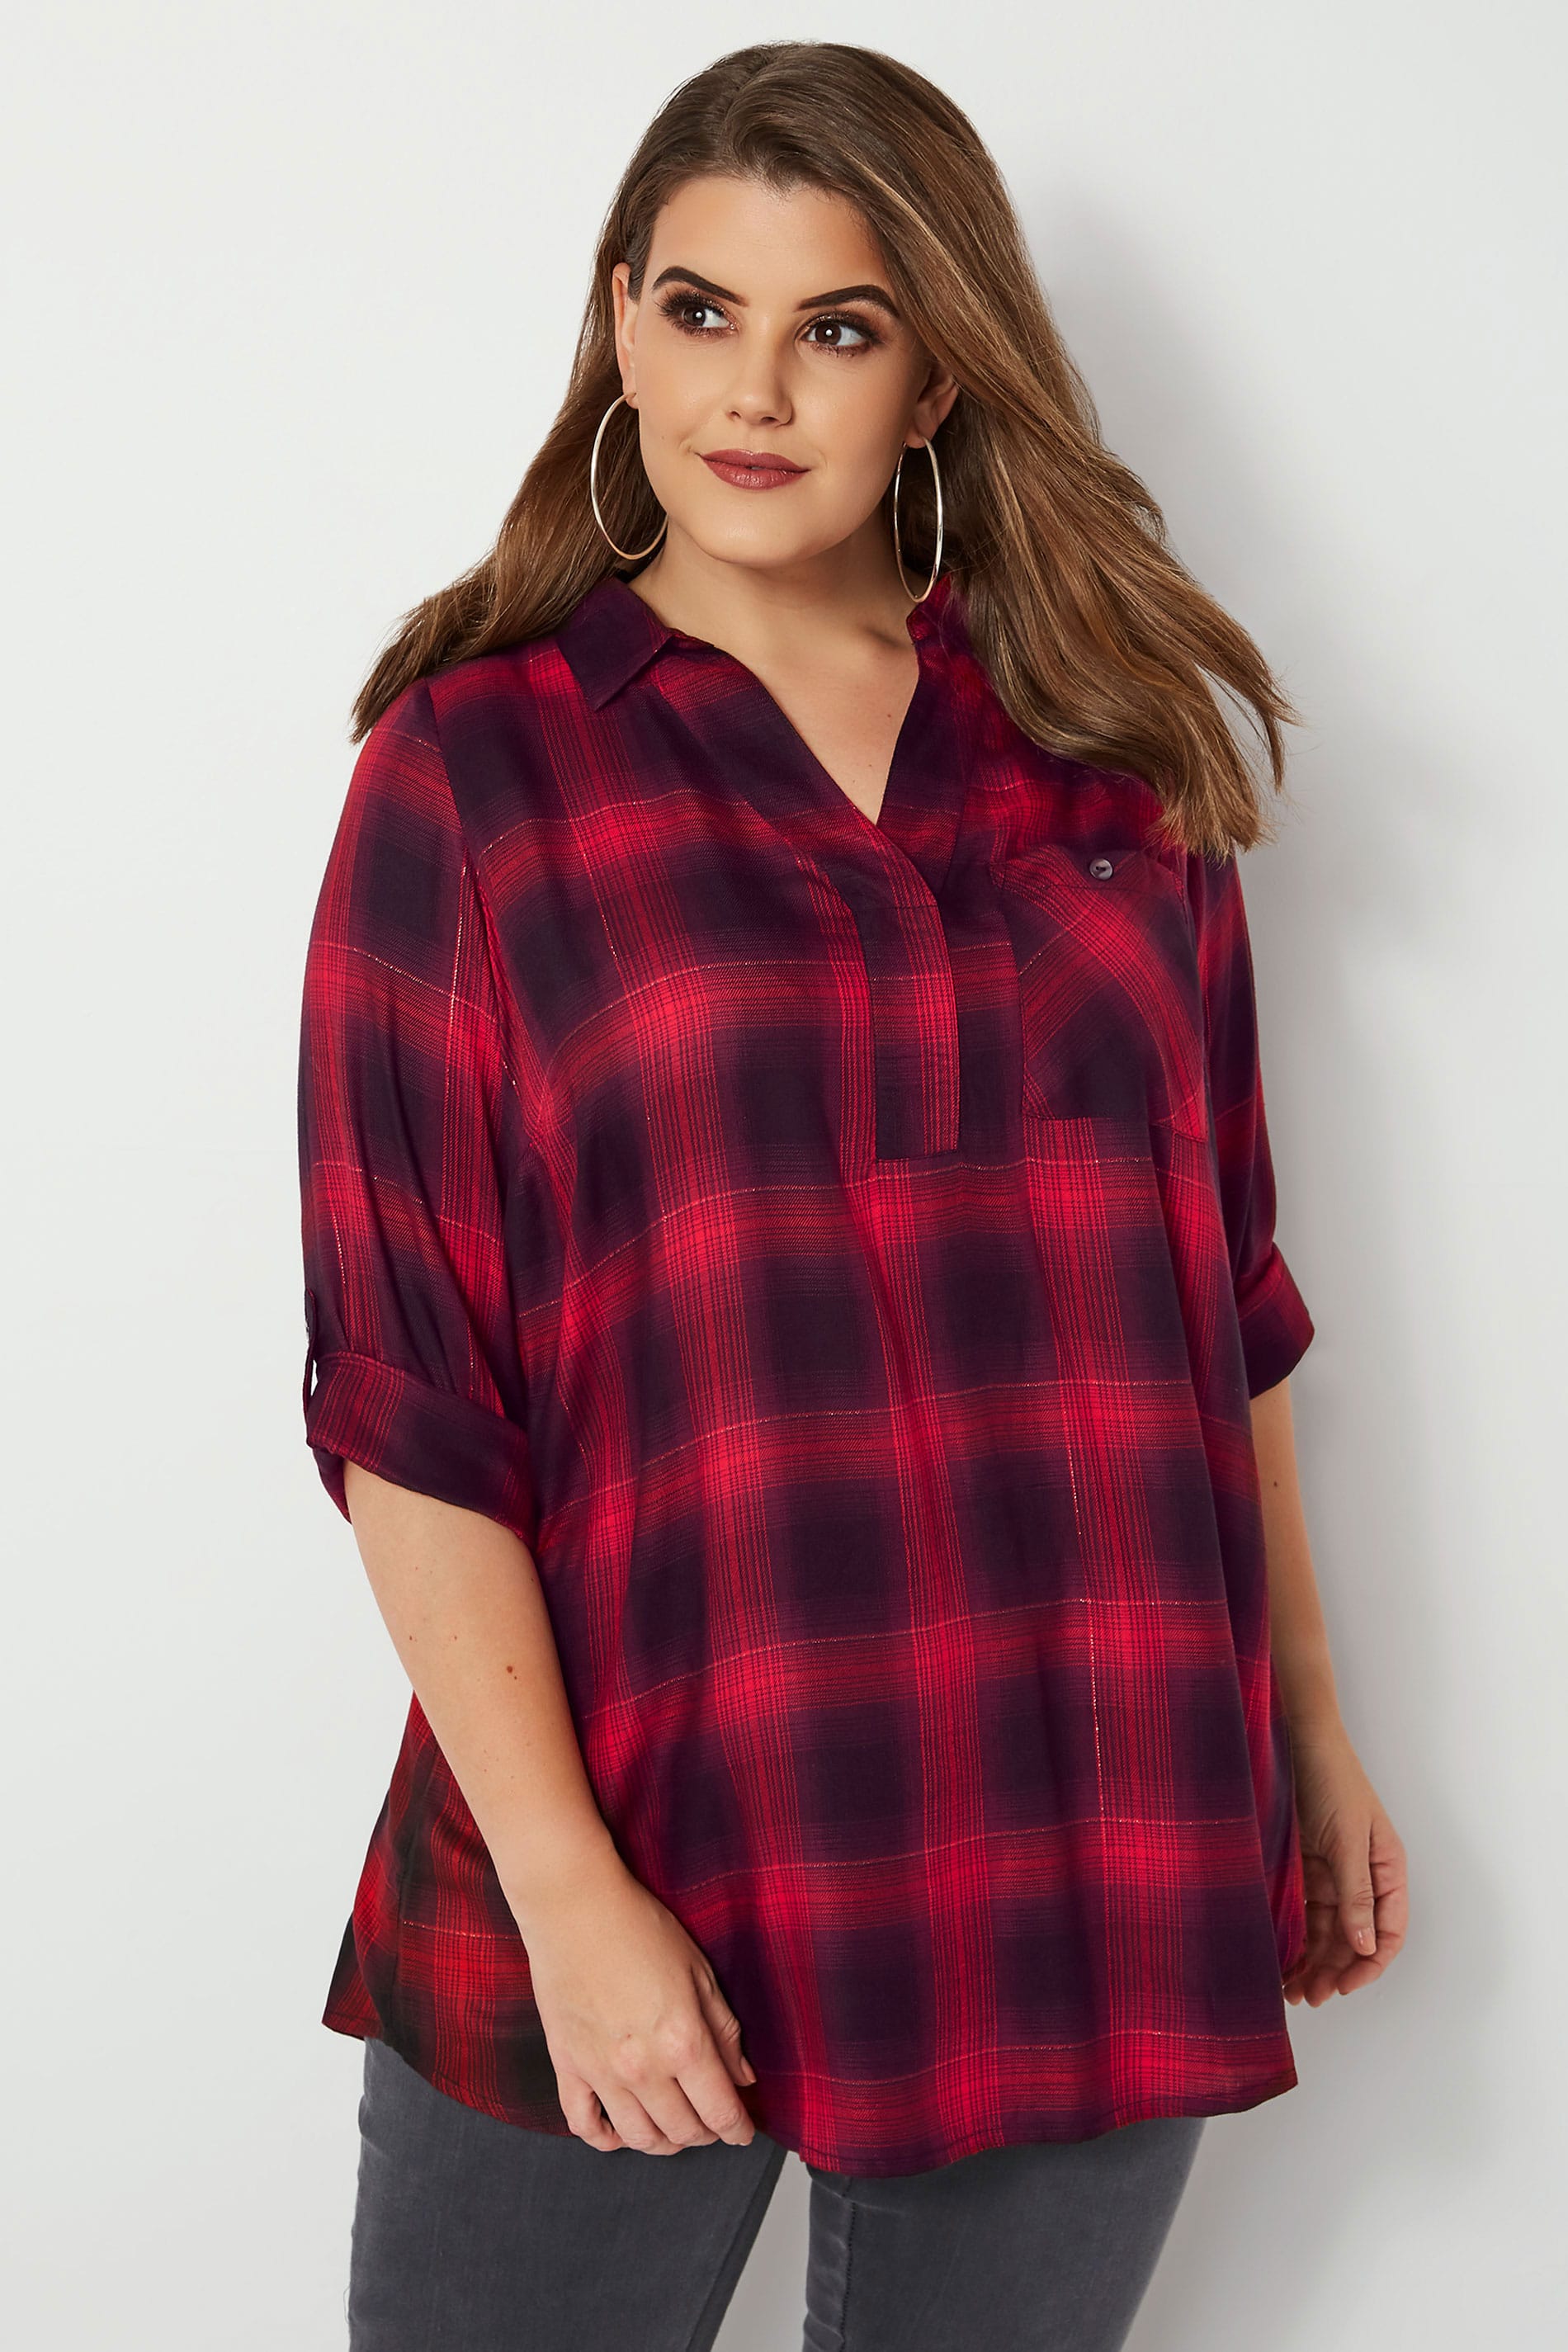 Red & Black Oversized Checked Shirt With V-Neck & Metallic Thread, plus ...